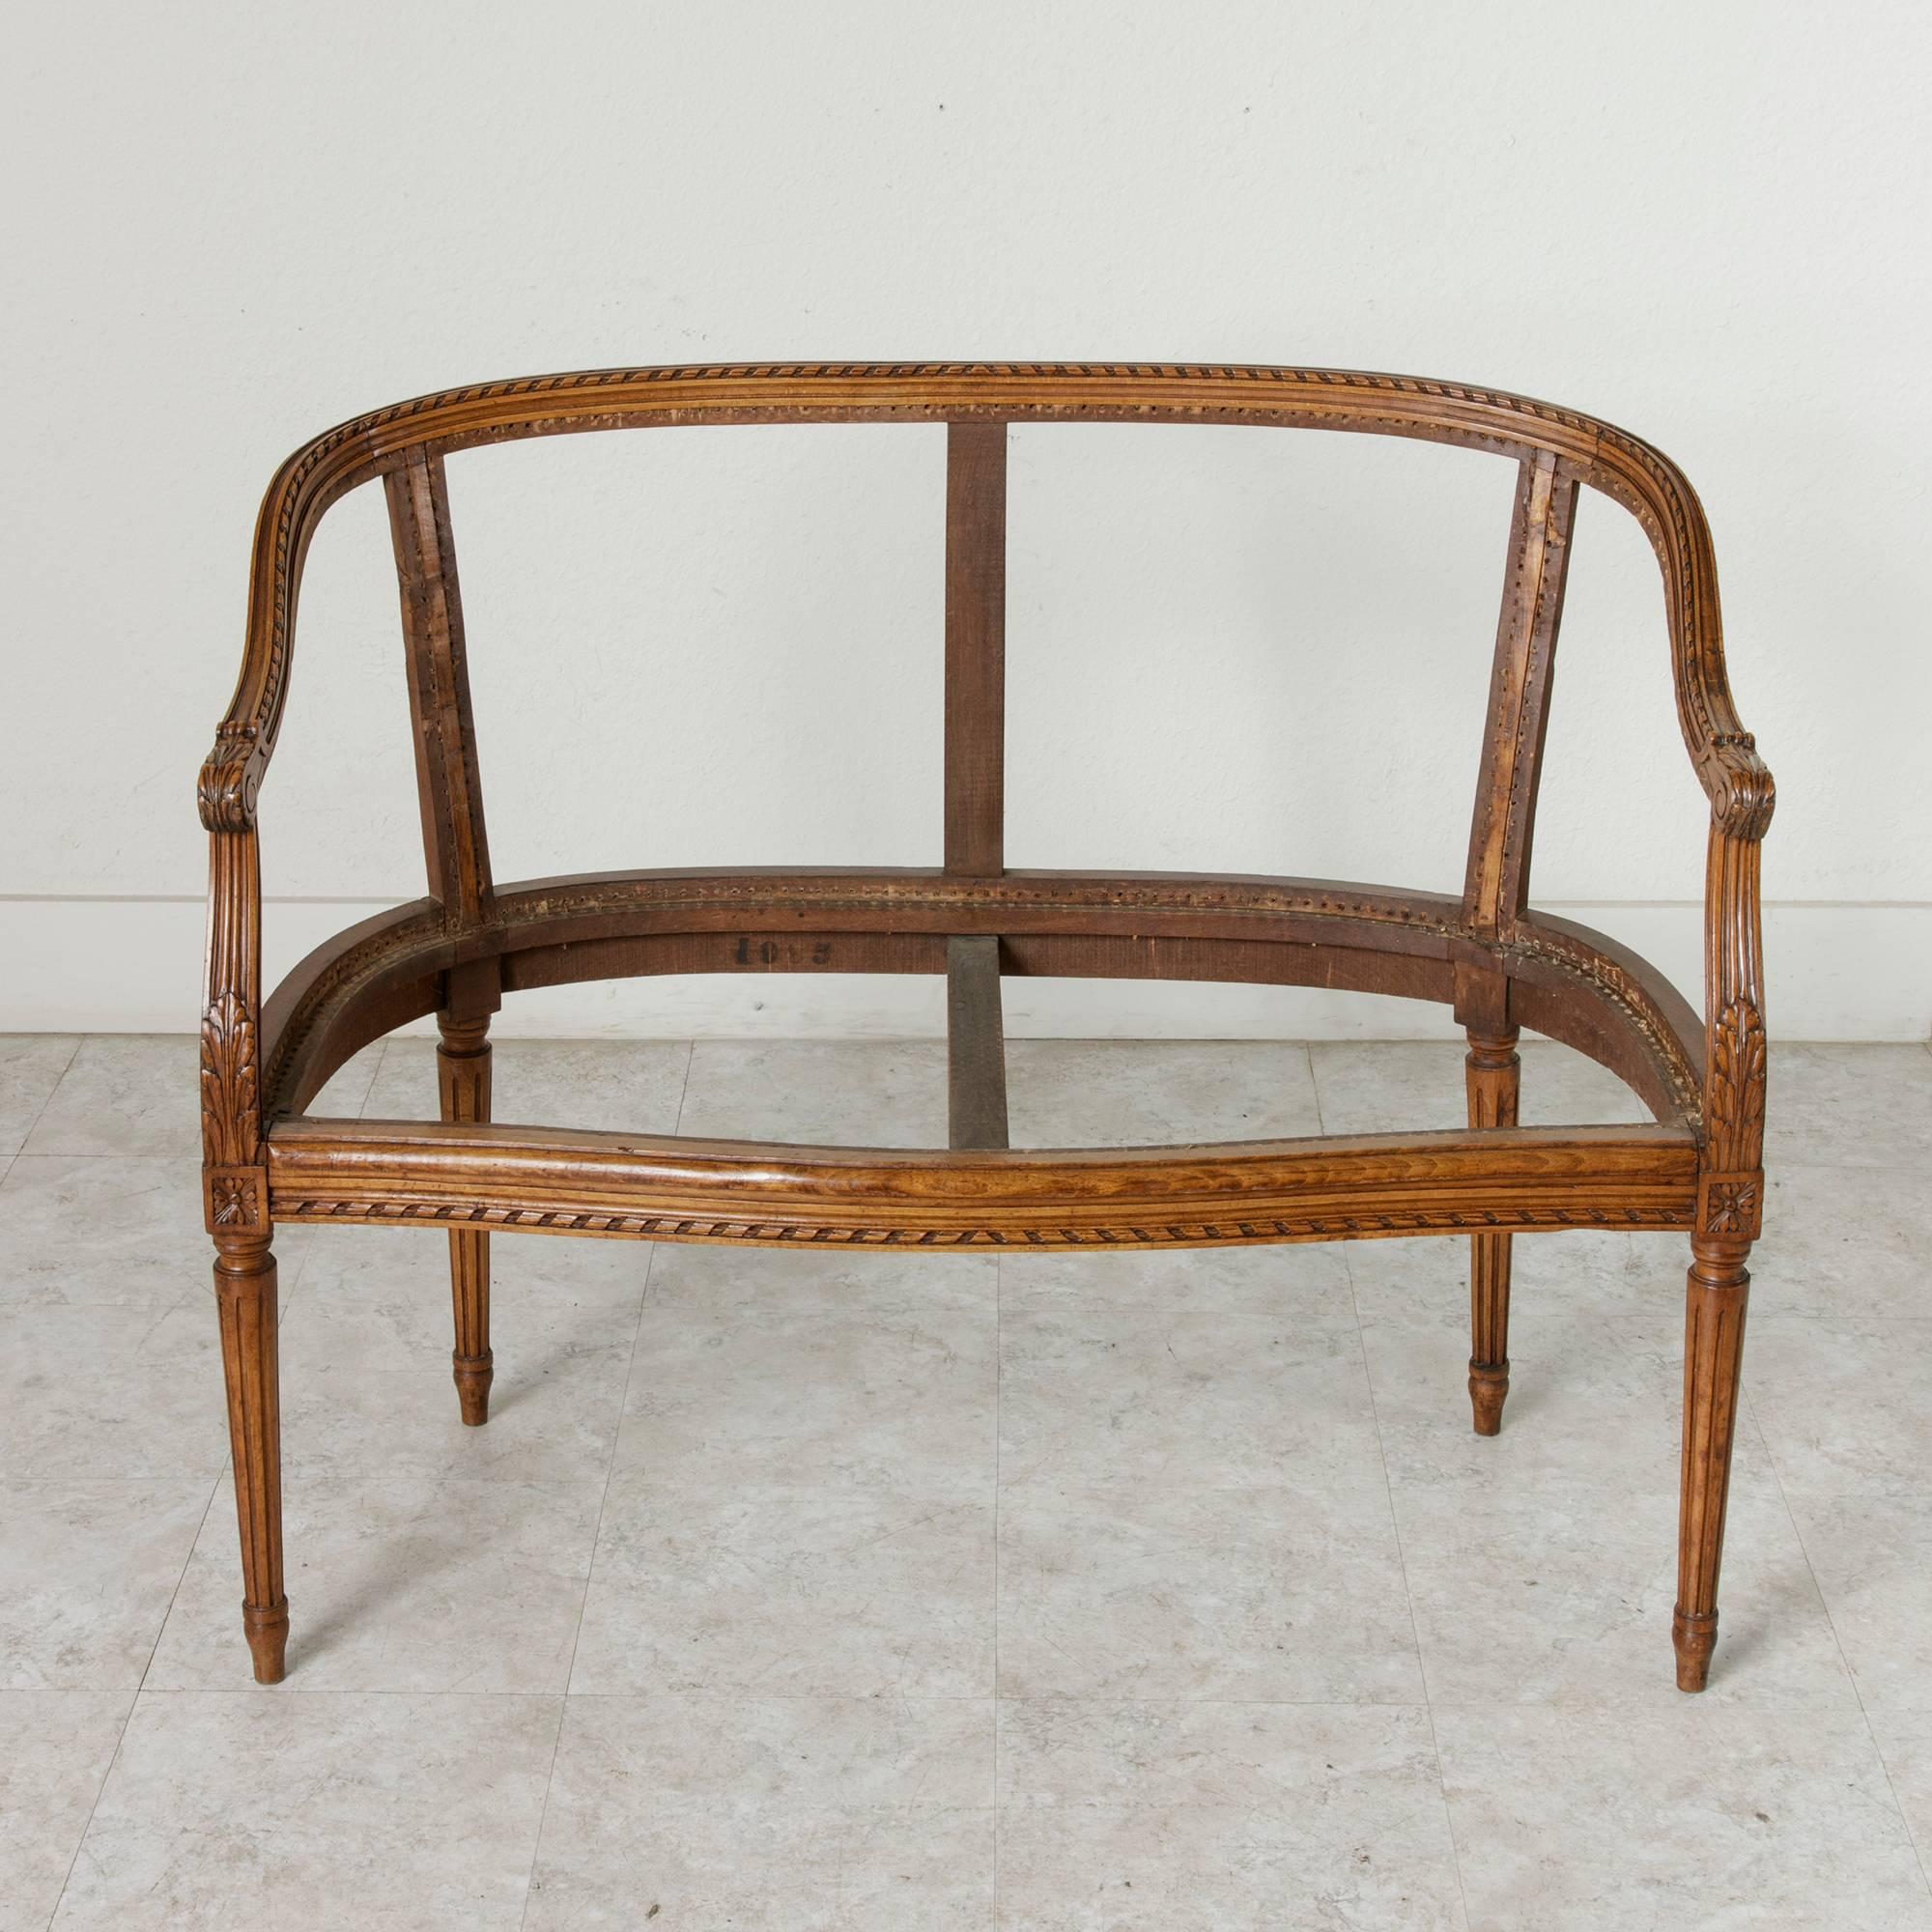 Late 19th Century French Louis XVI Style Hand-Carved Walnut Settee, Bench Frame 1